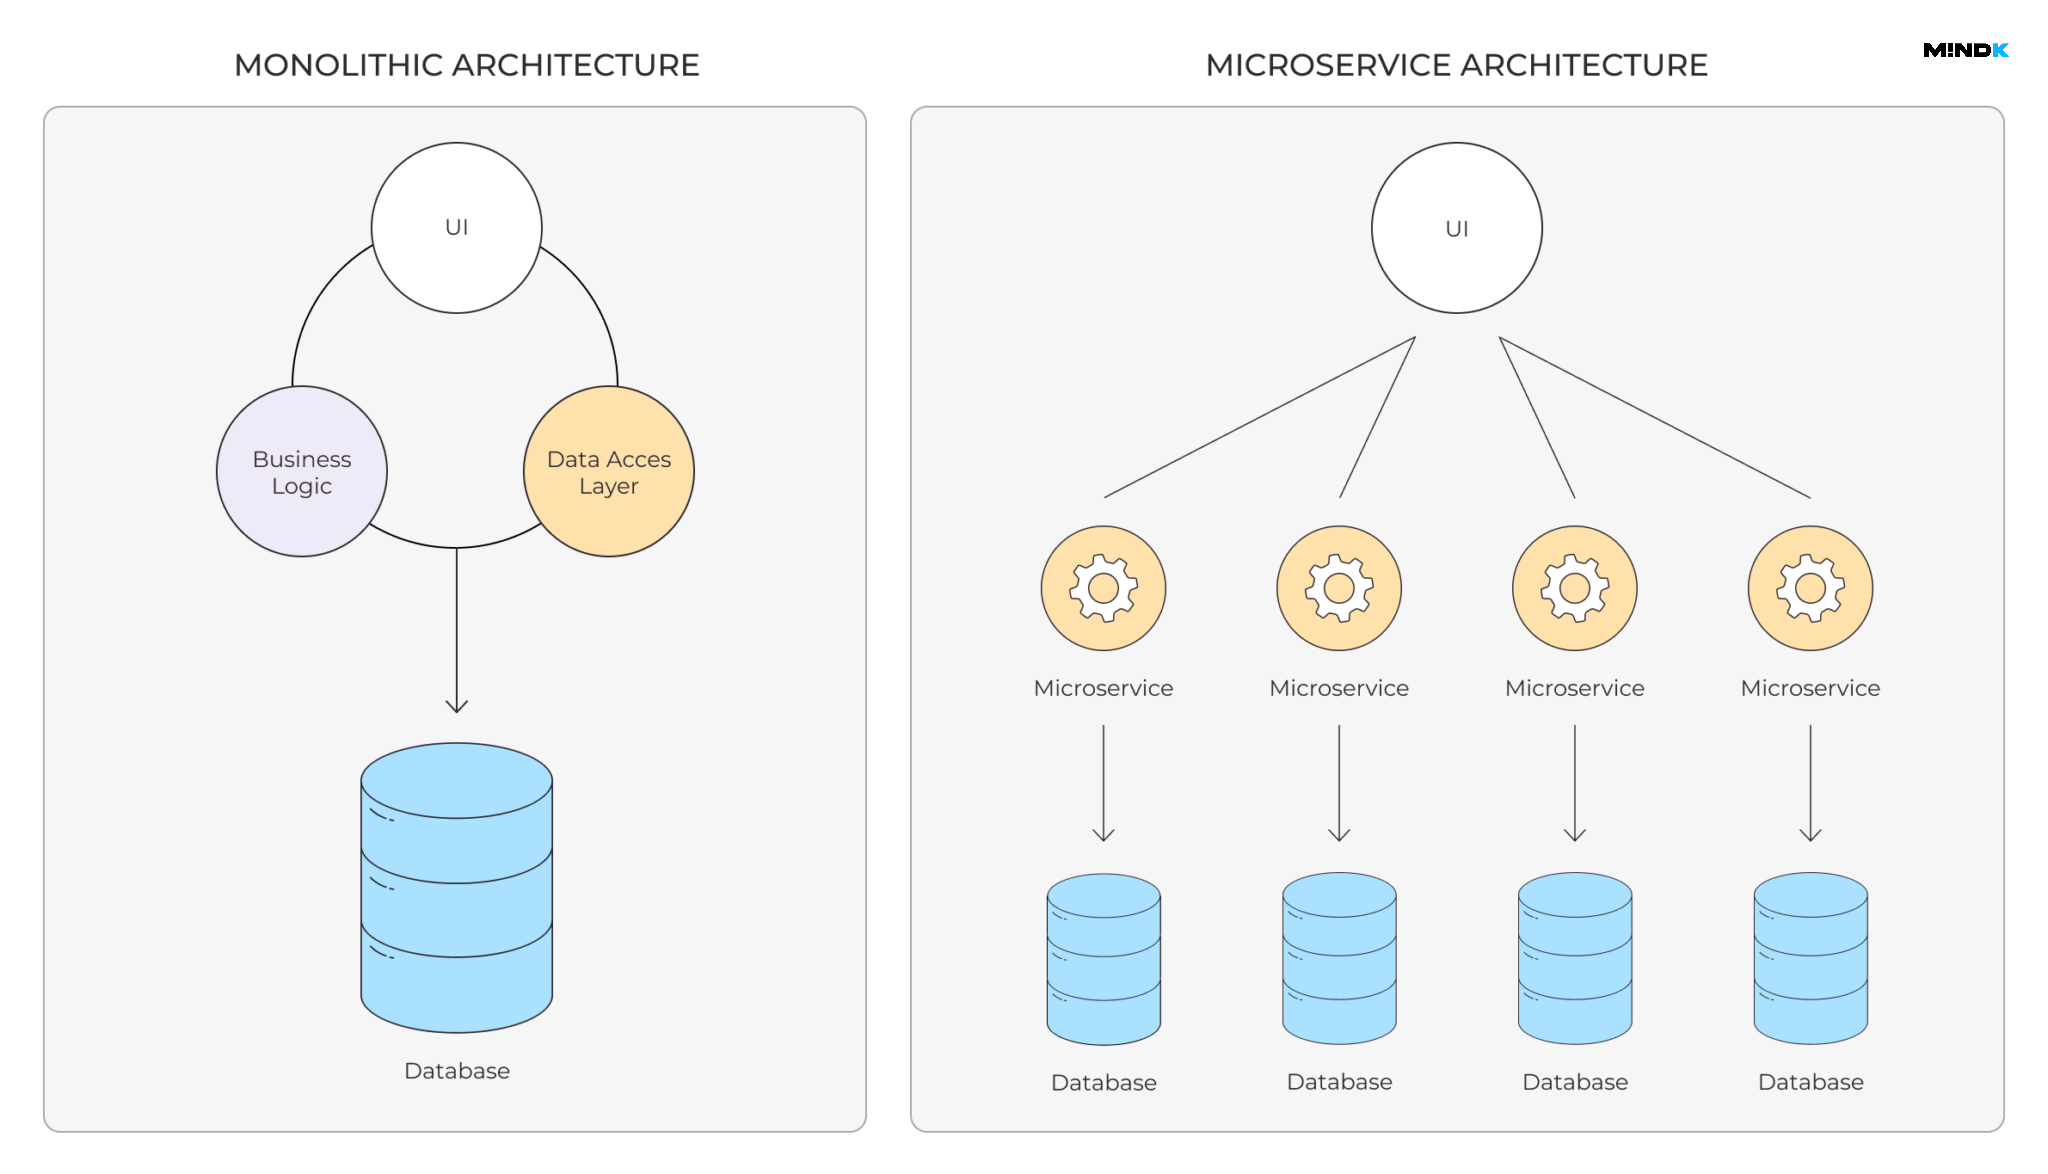 Differences between monolithic and microservice architecture